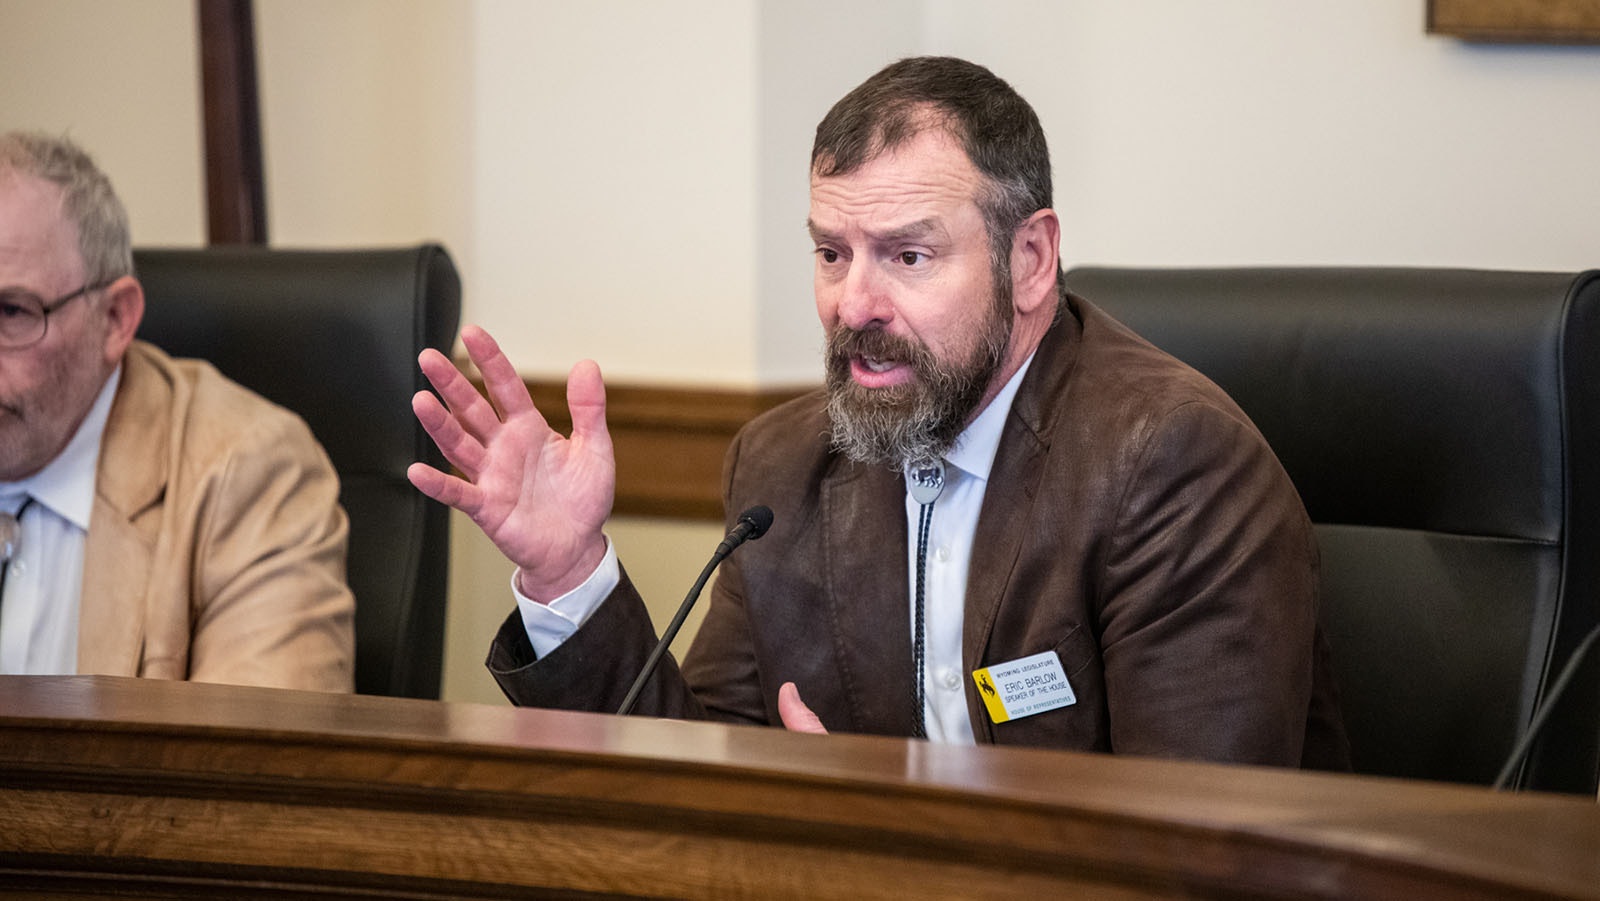 Wyoming state Sen. Eric Barlow, R-Gillette, is pushing a bill that would expand remedies for vulnerable adults to being able to file civil lawsuits.